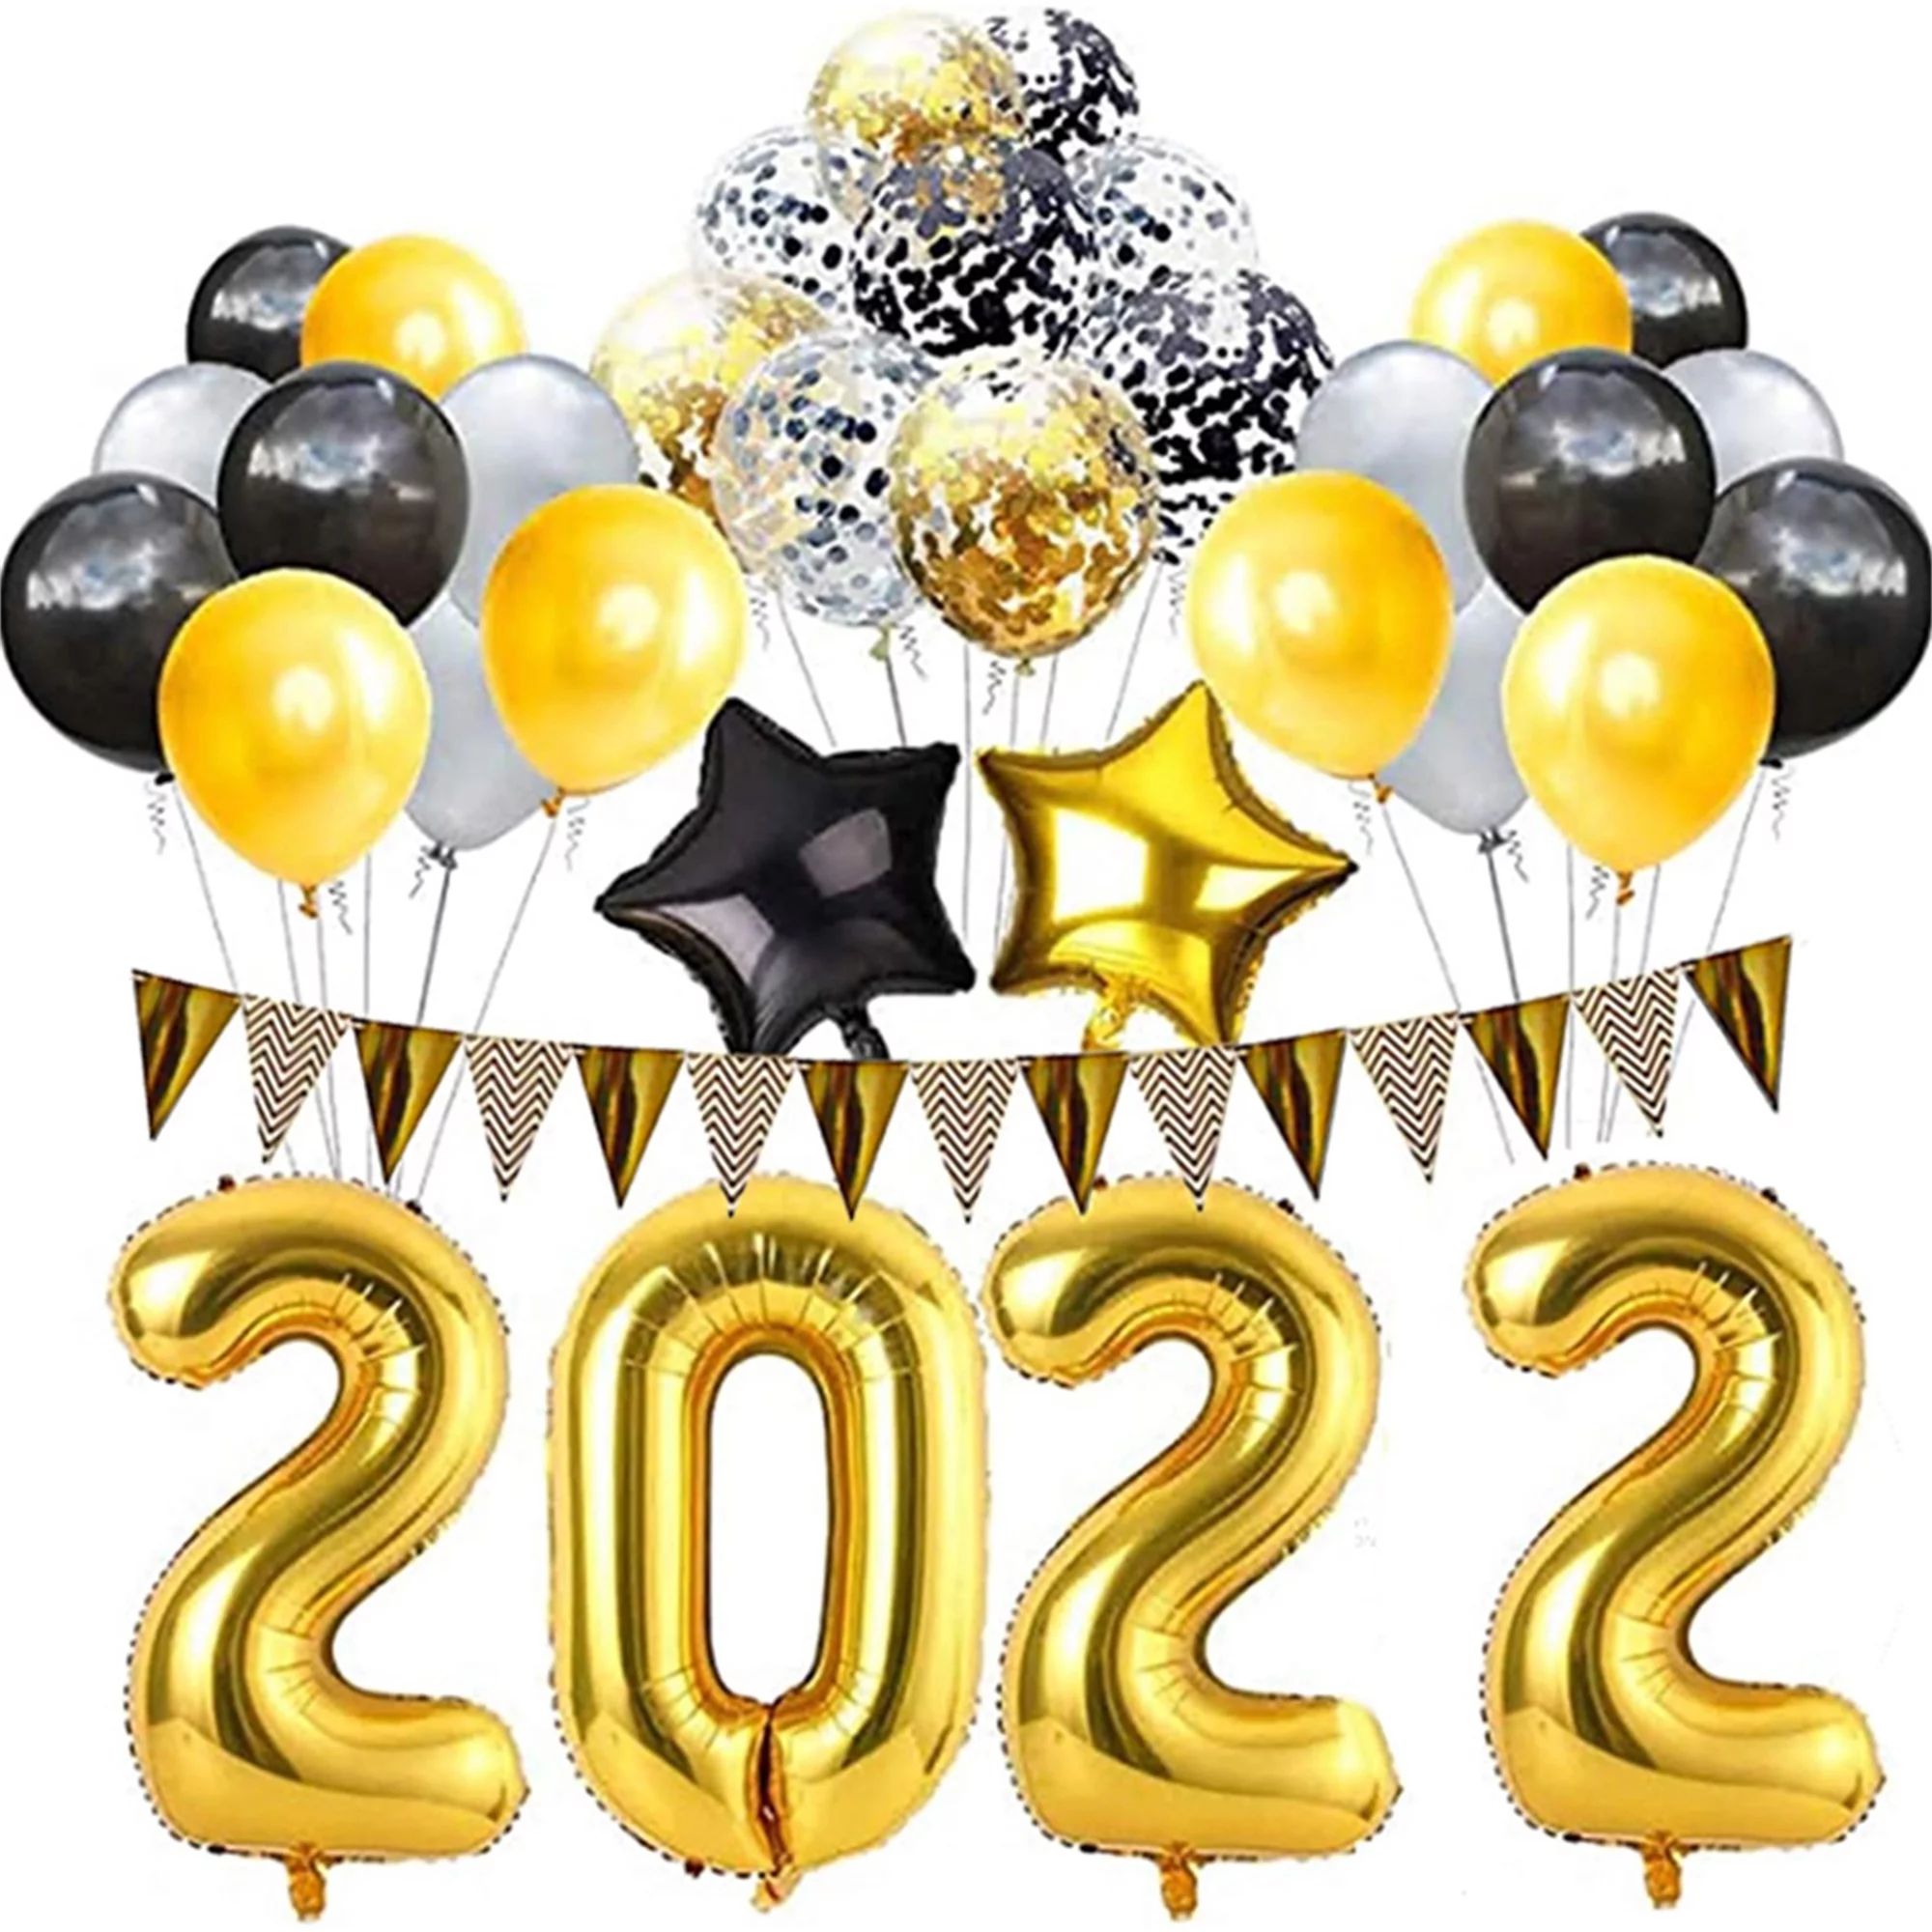 yongy 52 Pcs 2022 New Year Foil Balloons Set,Banners Background Decor New Years Eve Party Supplie... | Walmart (US)